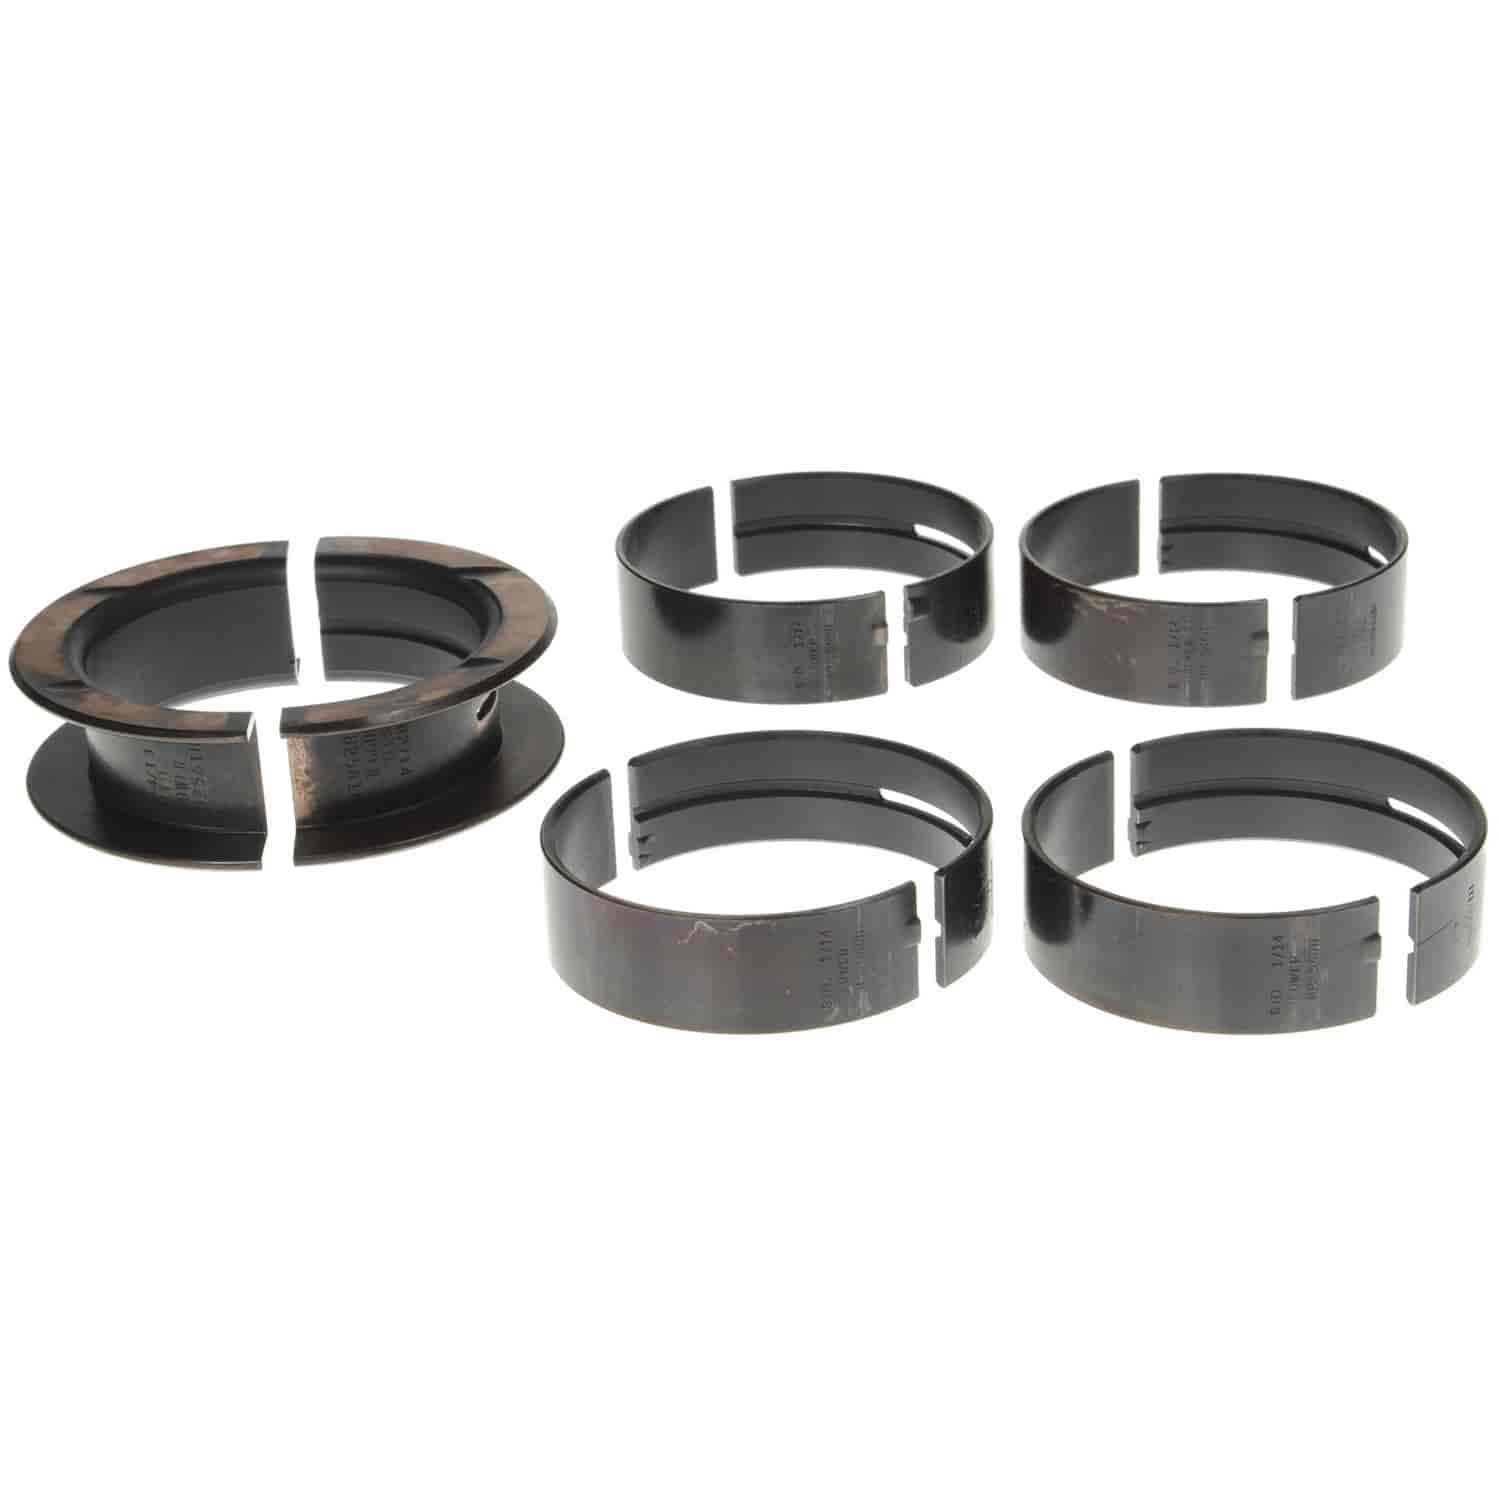 Main Bearing Set Ford 1969-1974 V8 351C (5.8L) with Standard Size